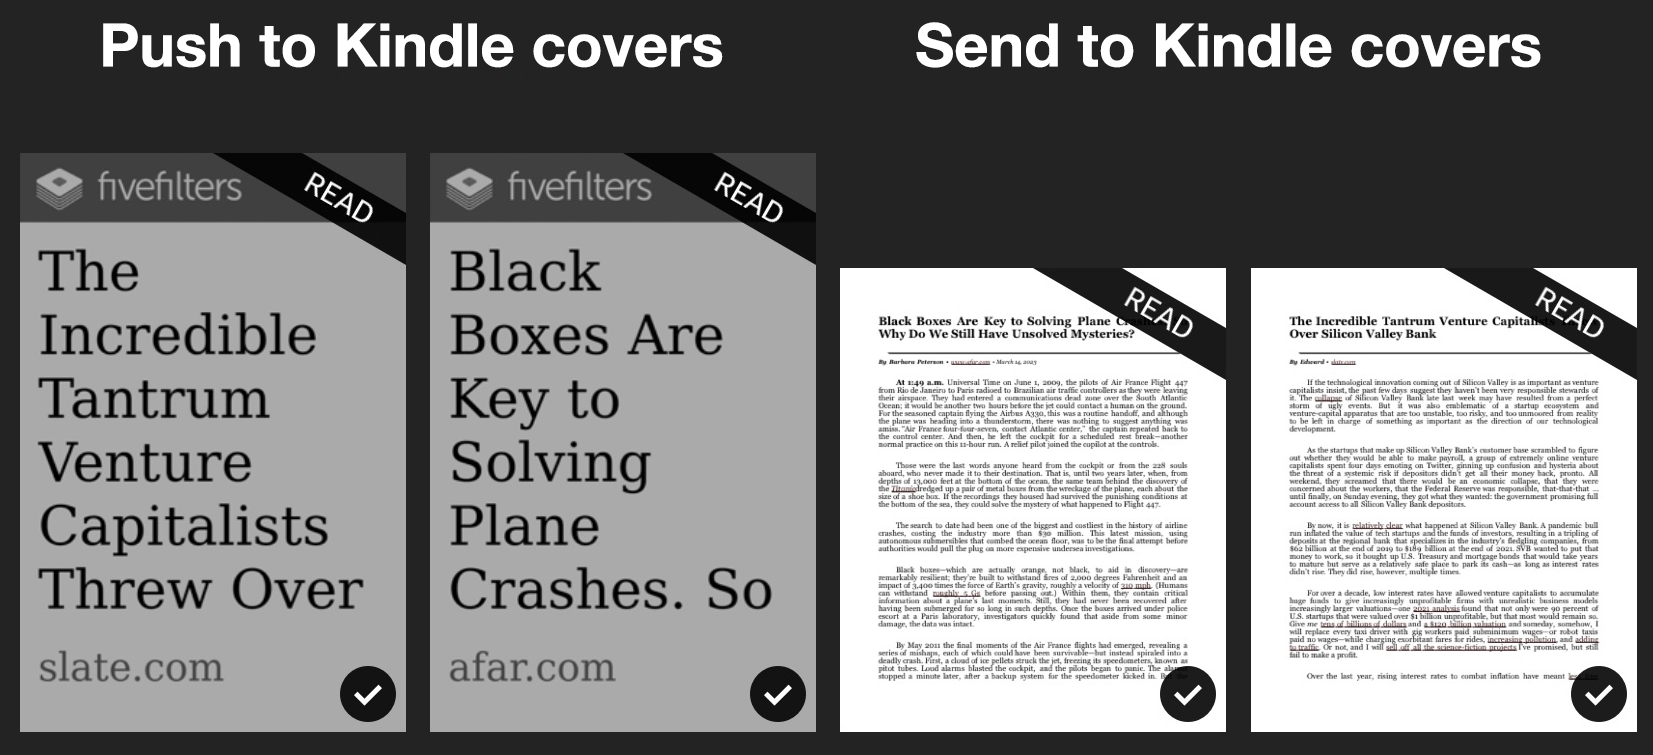 push-to-kindle-vs-send-to-kindle-covers.png